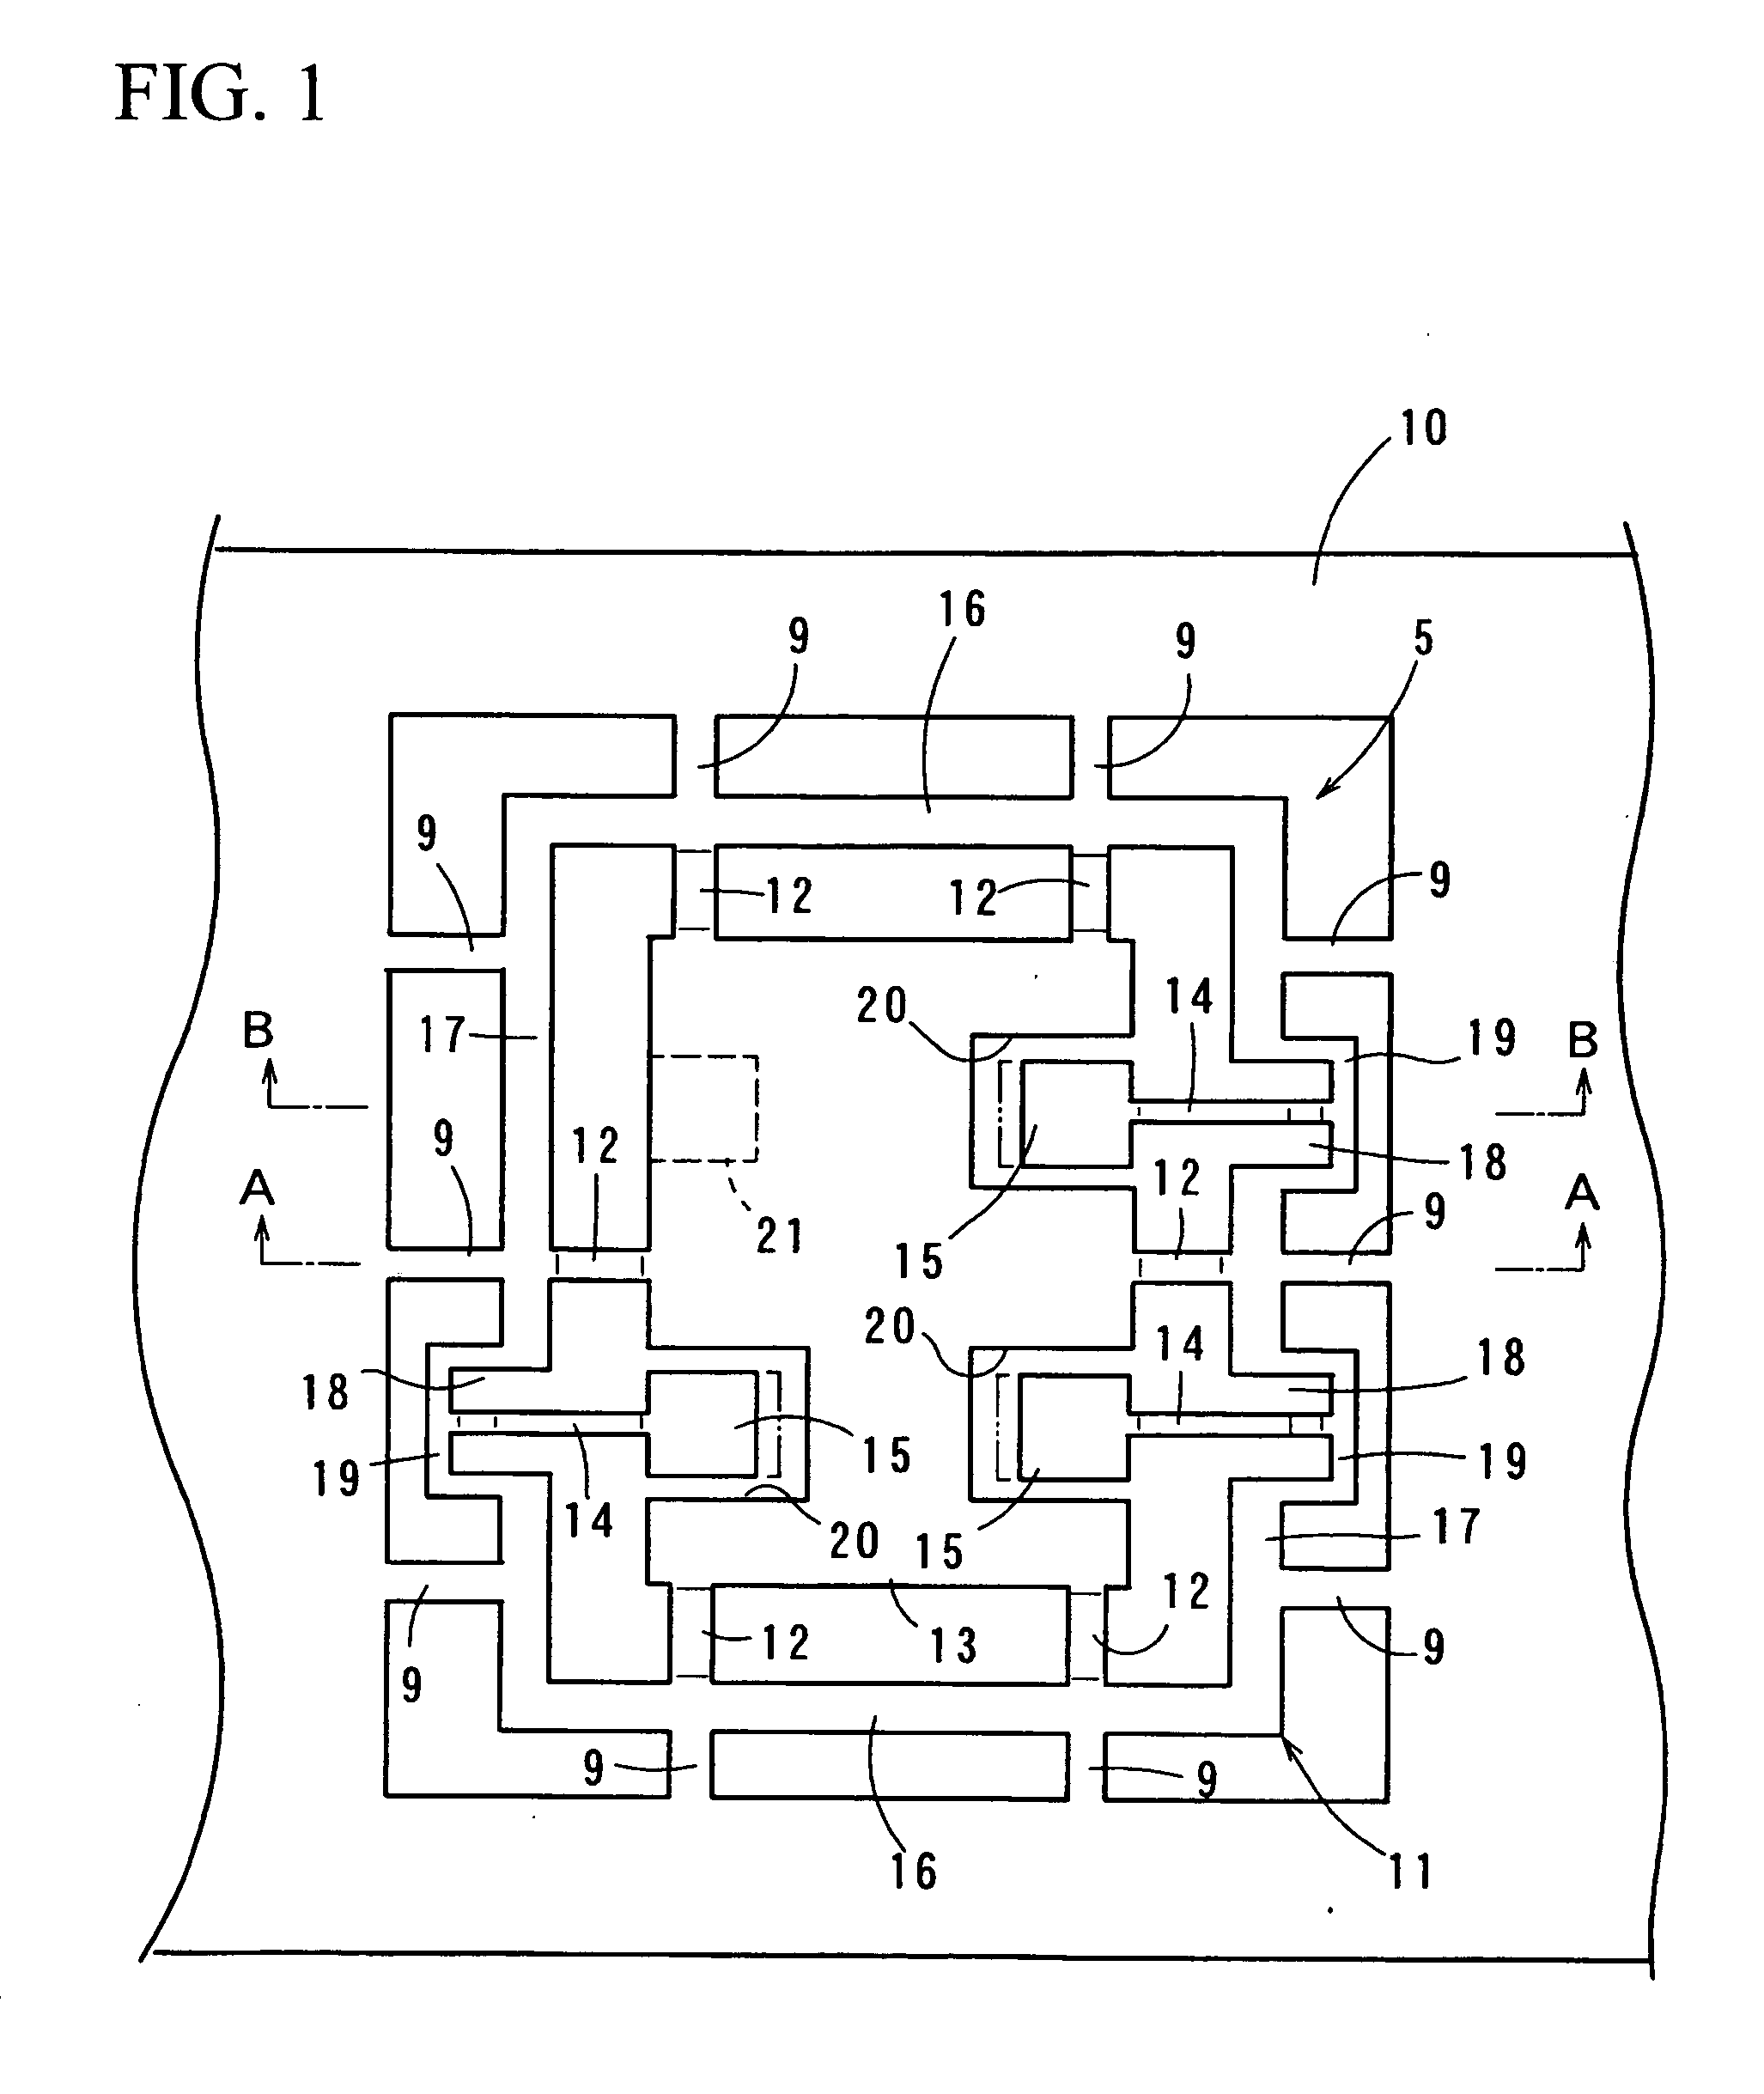 Lead frame and package of semiconductor device